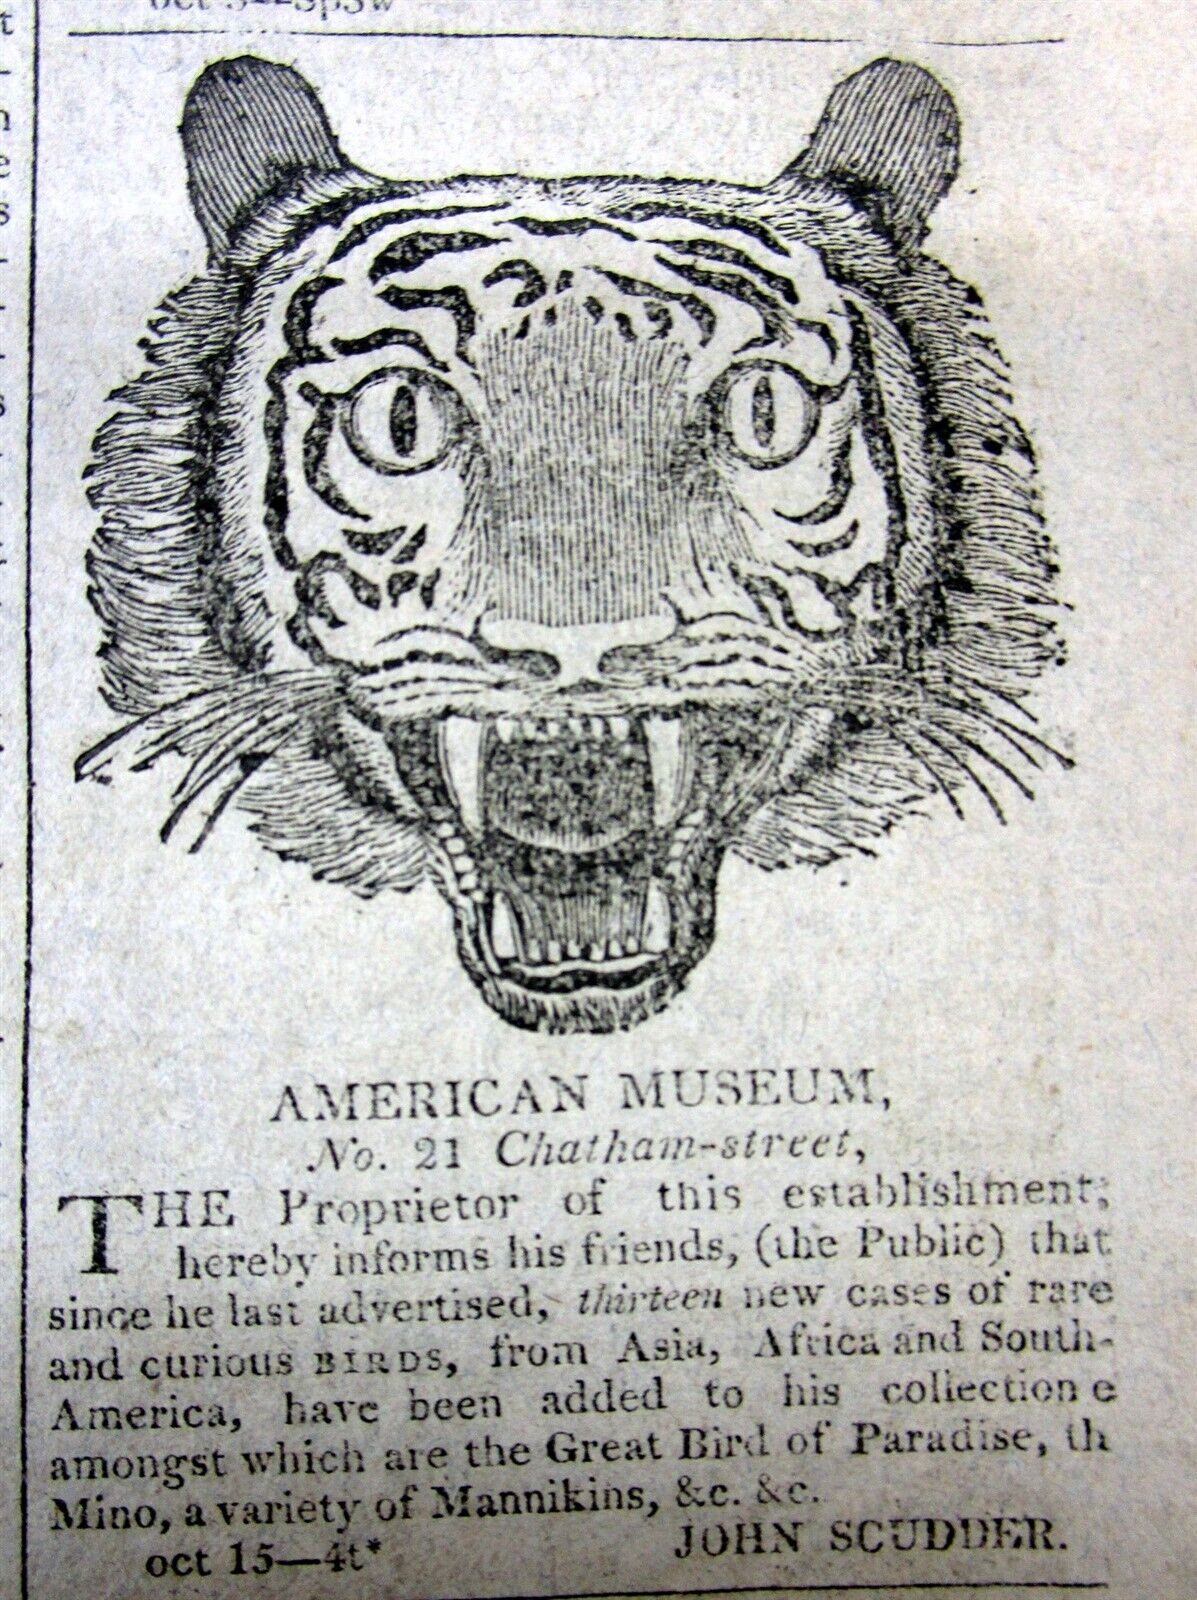 1810 newspaper w a large early FP illustrated CIRCUS AD featuring a fierce TIGER